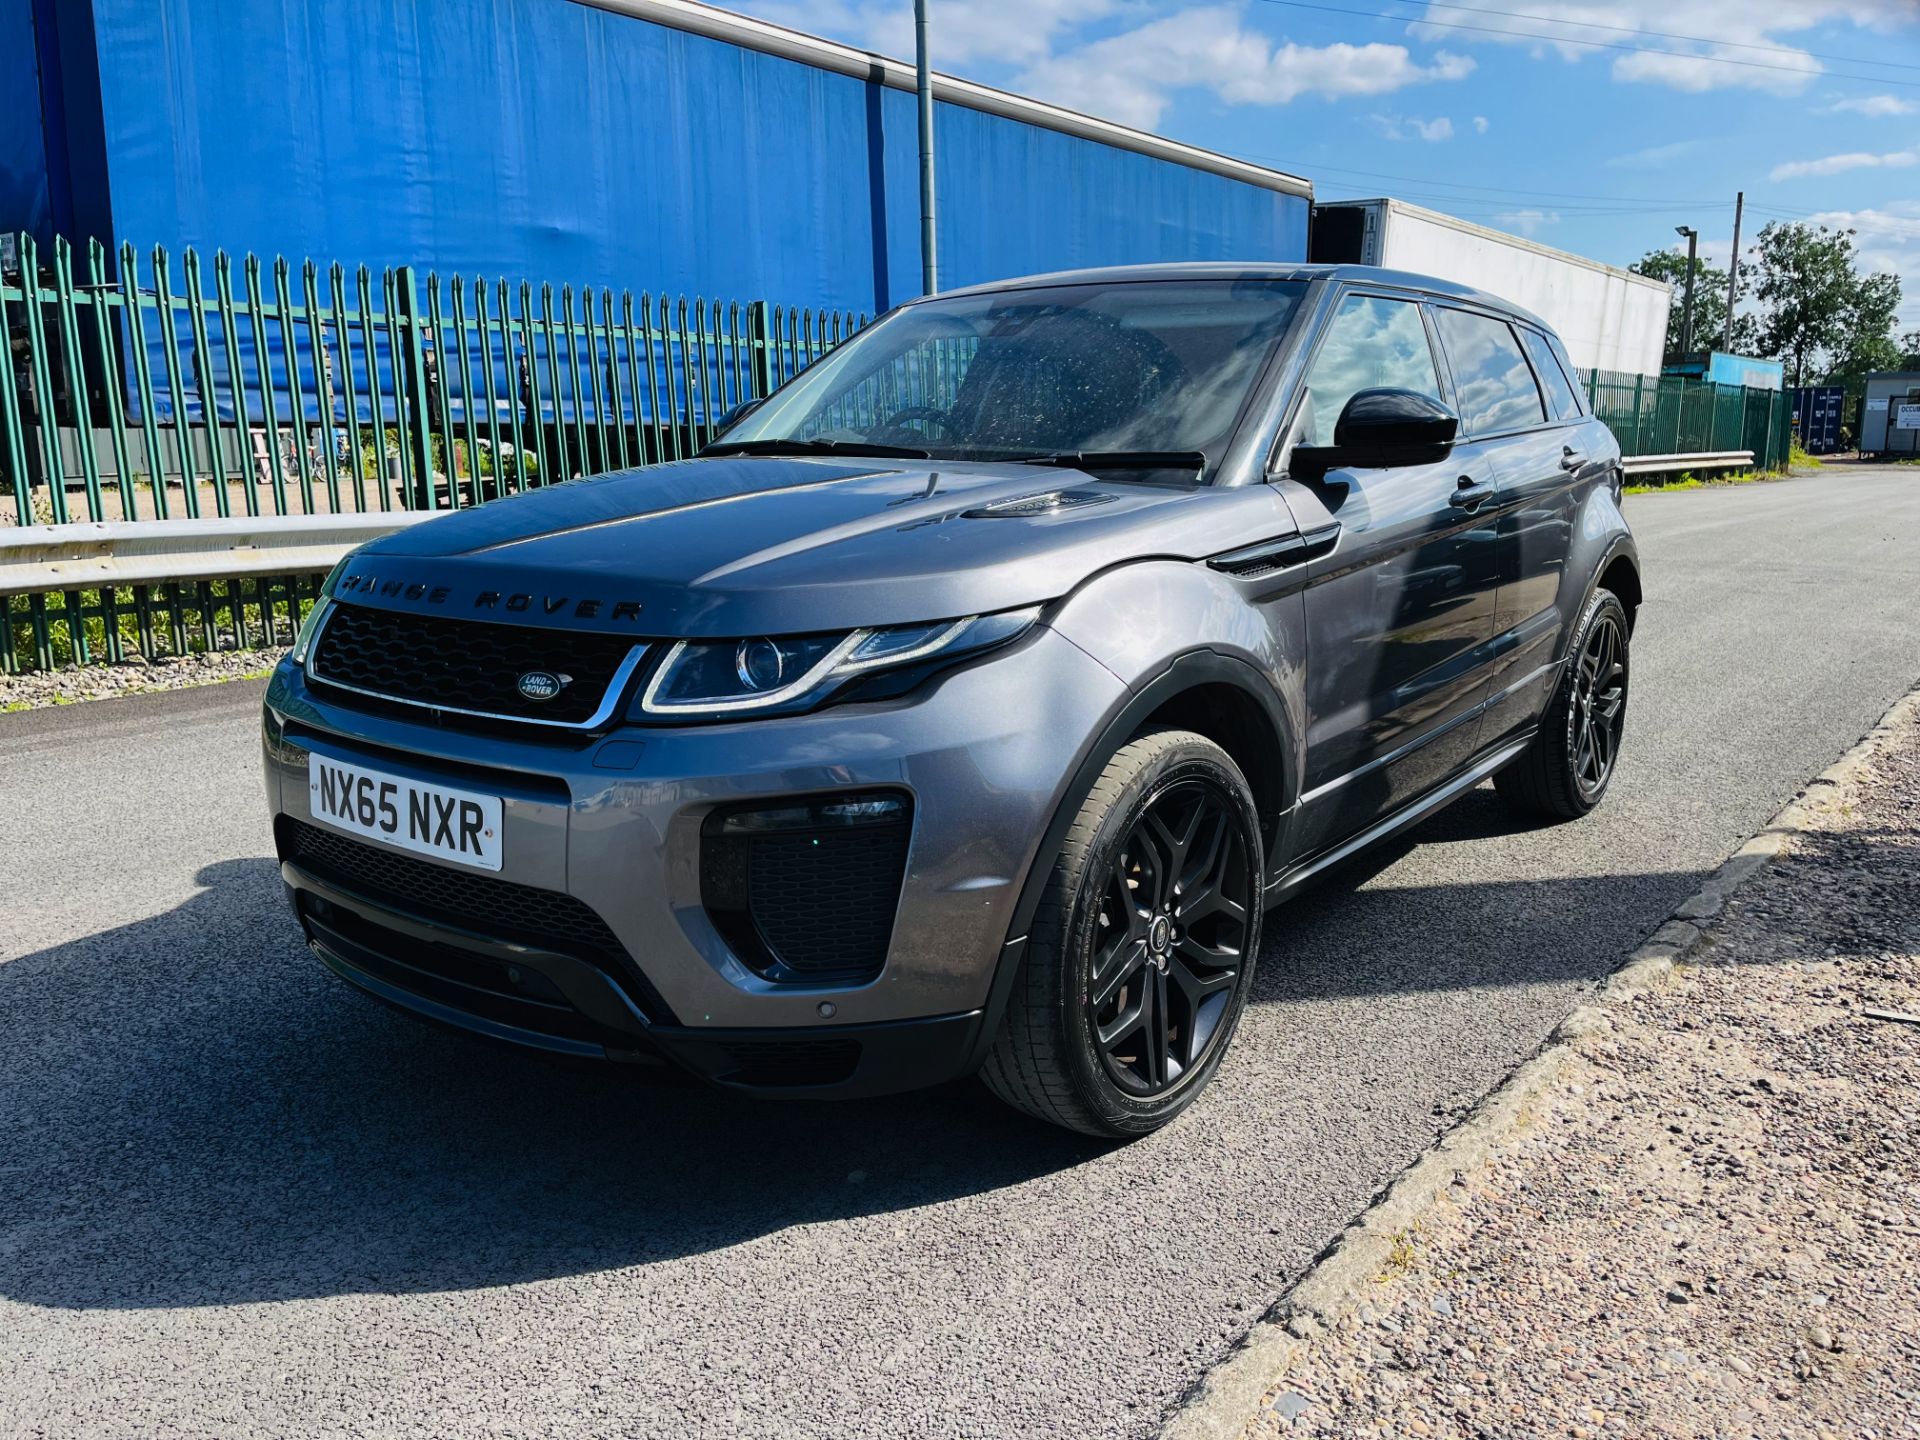 Range Rover Evoque Td4 Hse Dynamic (65 Reg) Auto Stop / Start - Full Leather -Rear Camera -High Spec - Image 5 of 29